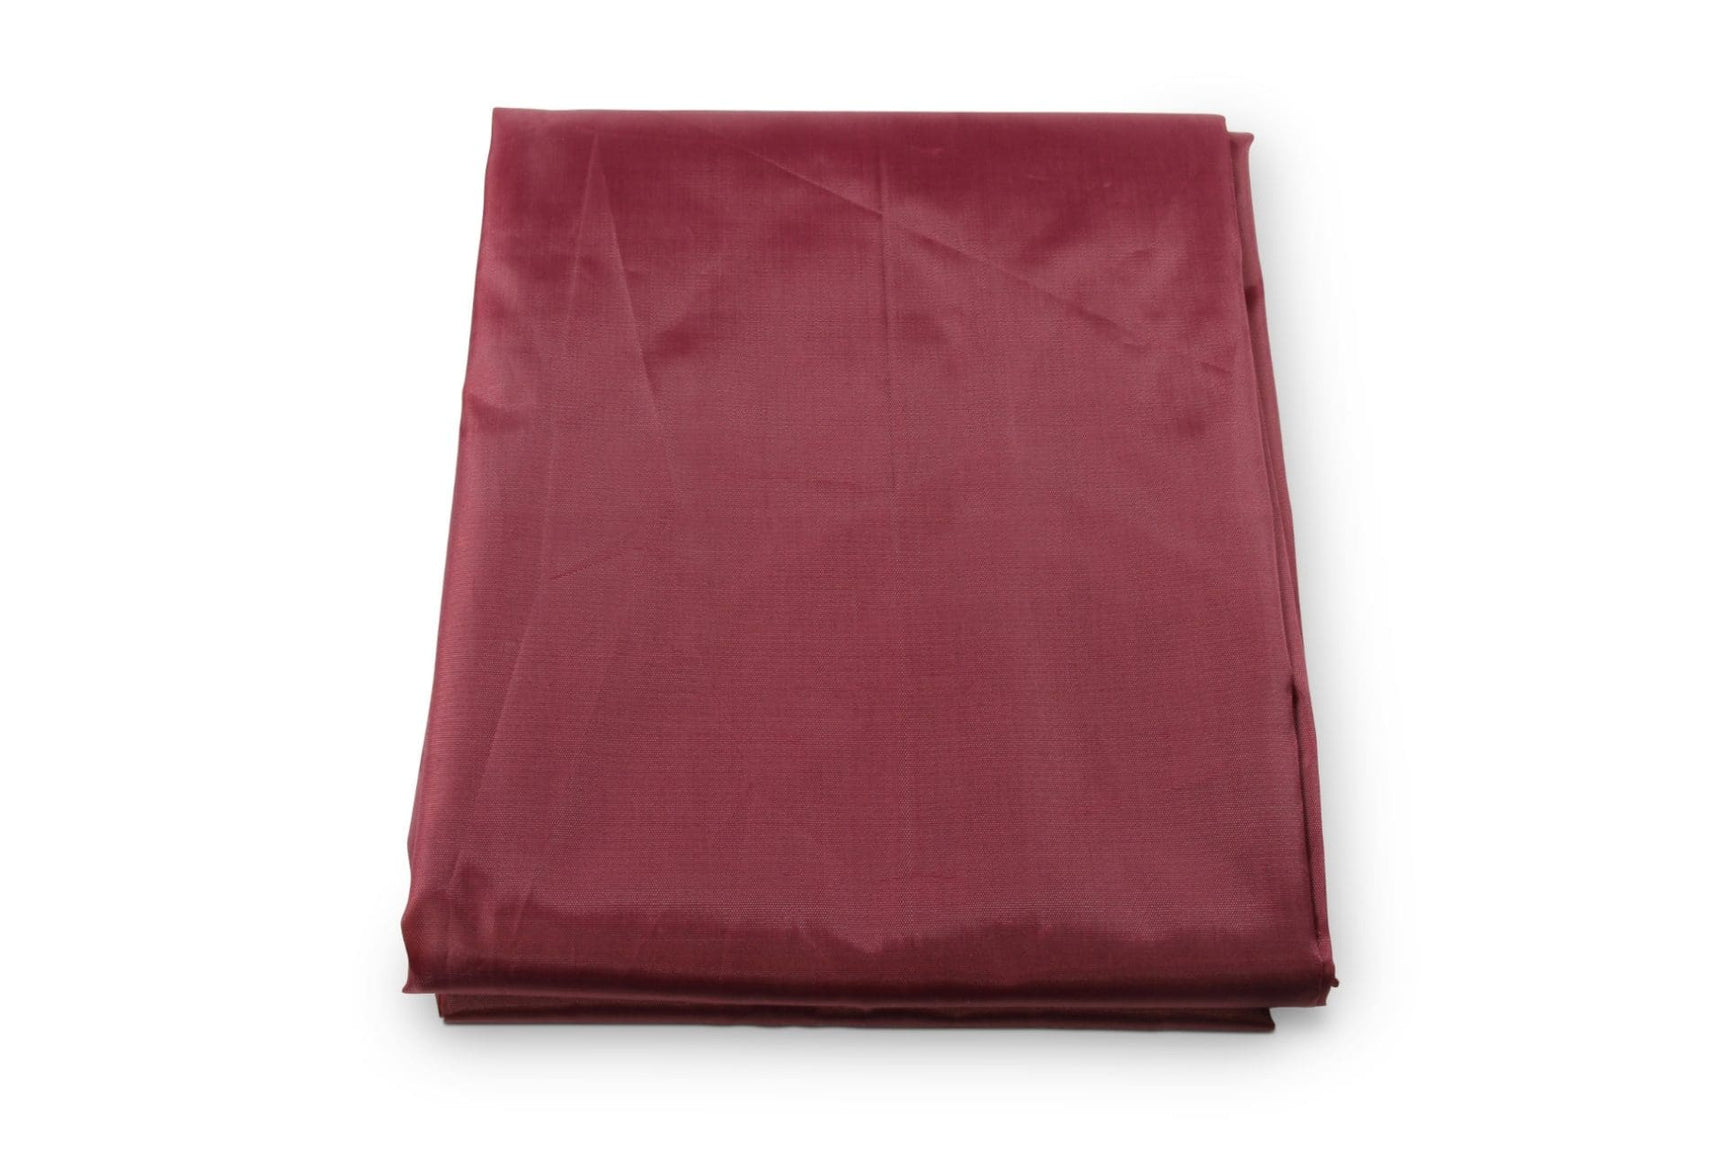 Plain 8ft UK Nylon Pool Table Cover with Fitted Elasticated Corners